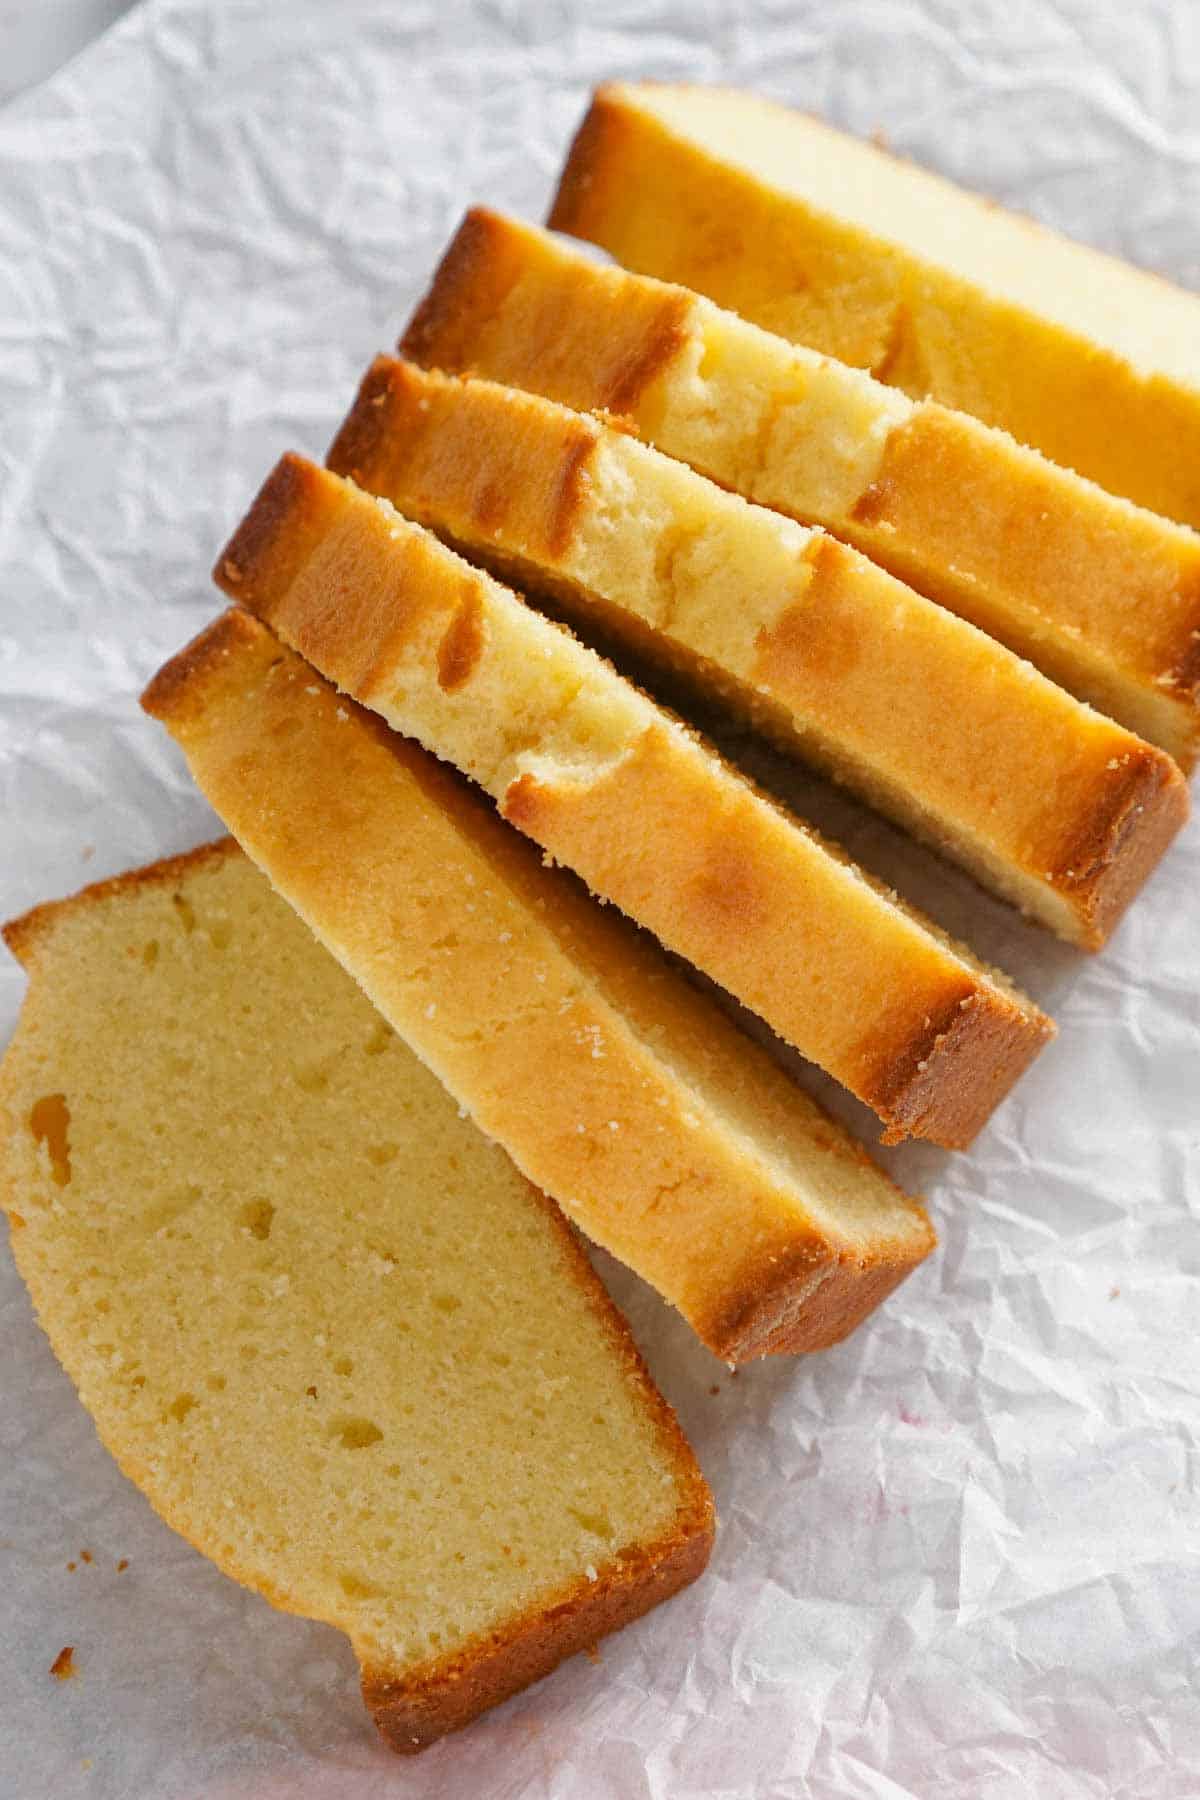 Overhead view of a loaf of pound cake sliced.